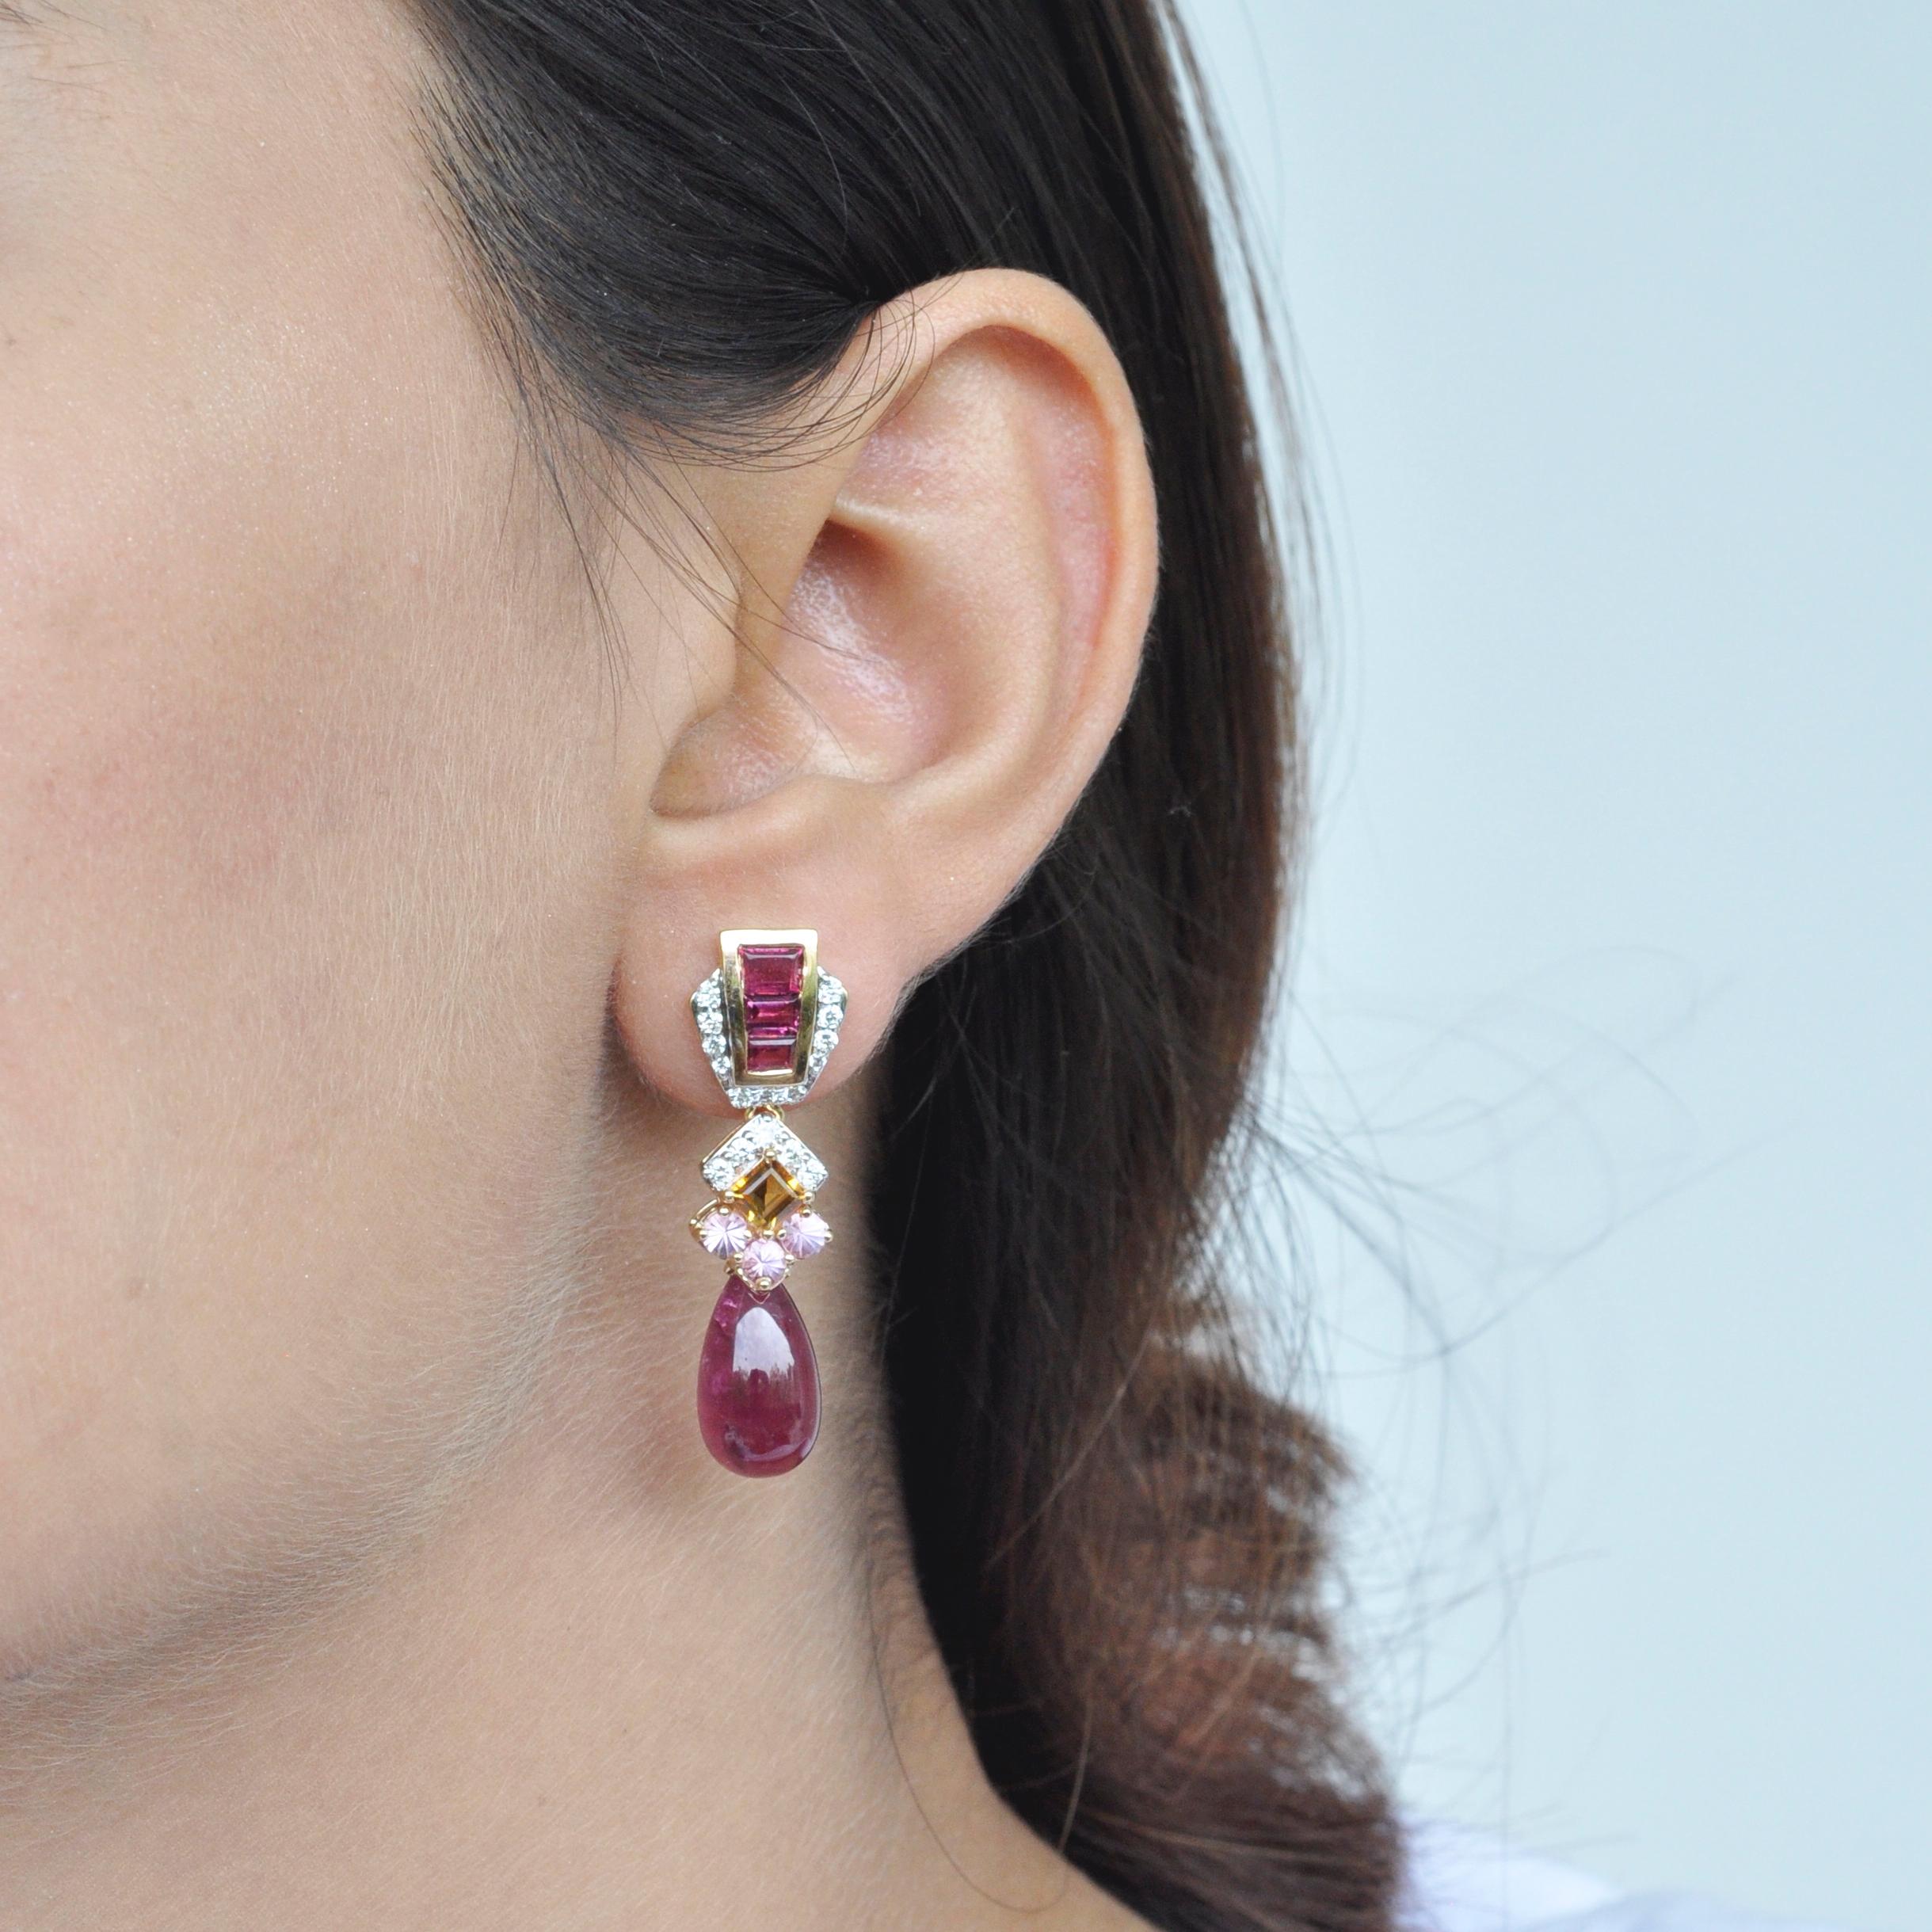 18 Karat Gold Rubellite Drop Pink Tourmaline Baguette Citrine Diamond Earrings

Pink delight - These earrings will really cheer you up with its vibrancy and hues. Set in 18k gold, the top of the earrings feature tapered cut pink tourmaline baguettes